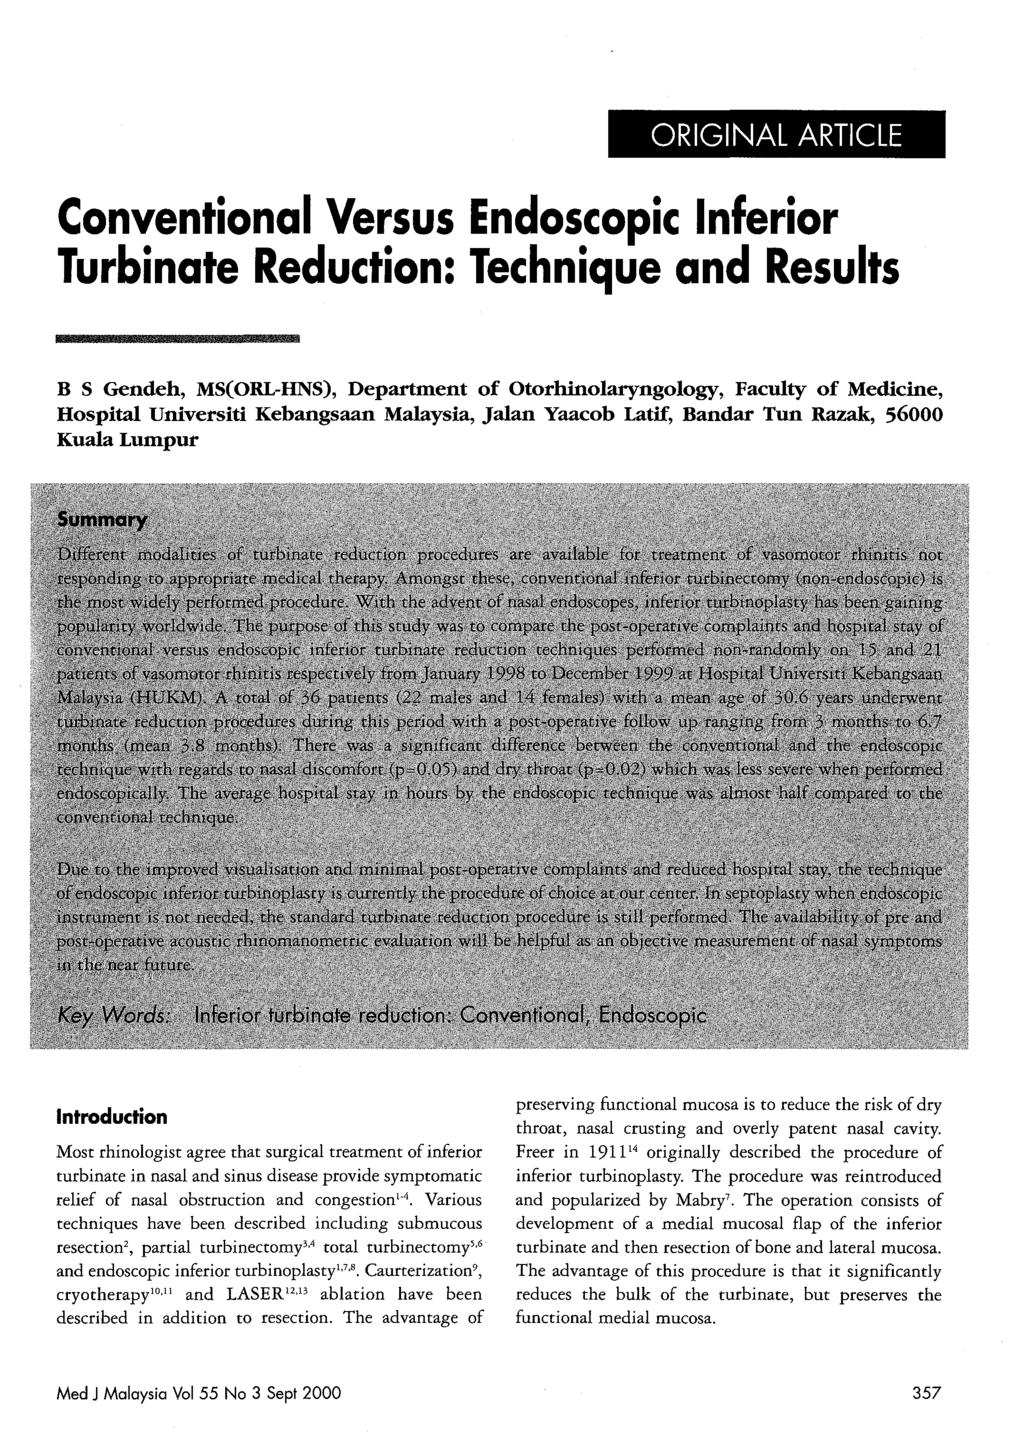 ORIGINAL ARTICLE Conventional Versus Endoscopic Inferior Turbinate Reduction: Technique and Results B S Gendeh, MS(ORL-HNS), Department of Otorhinolaryngology, Faculty of Medicine, Hospital